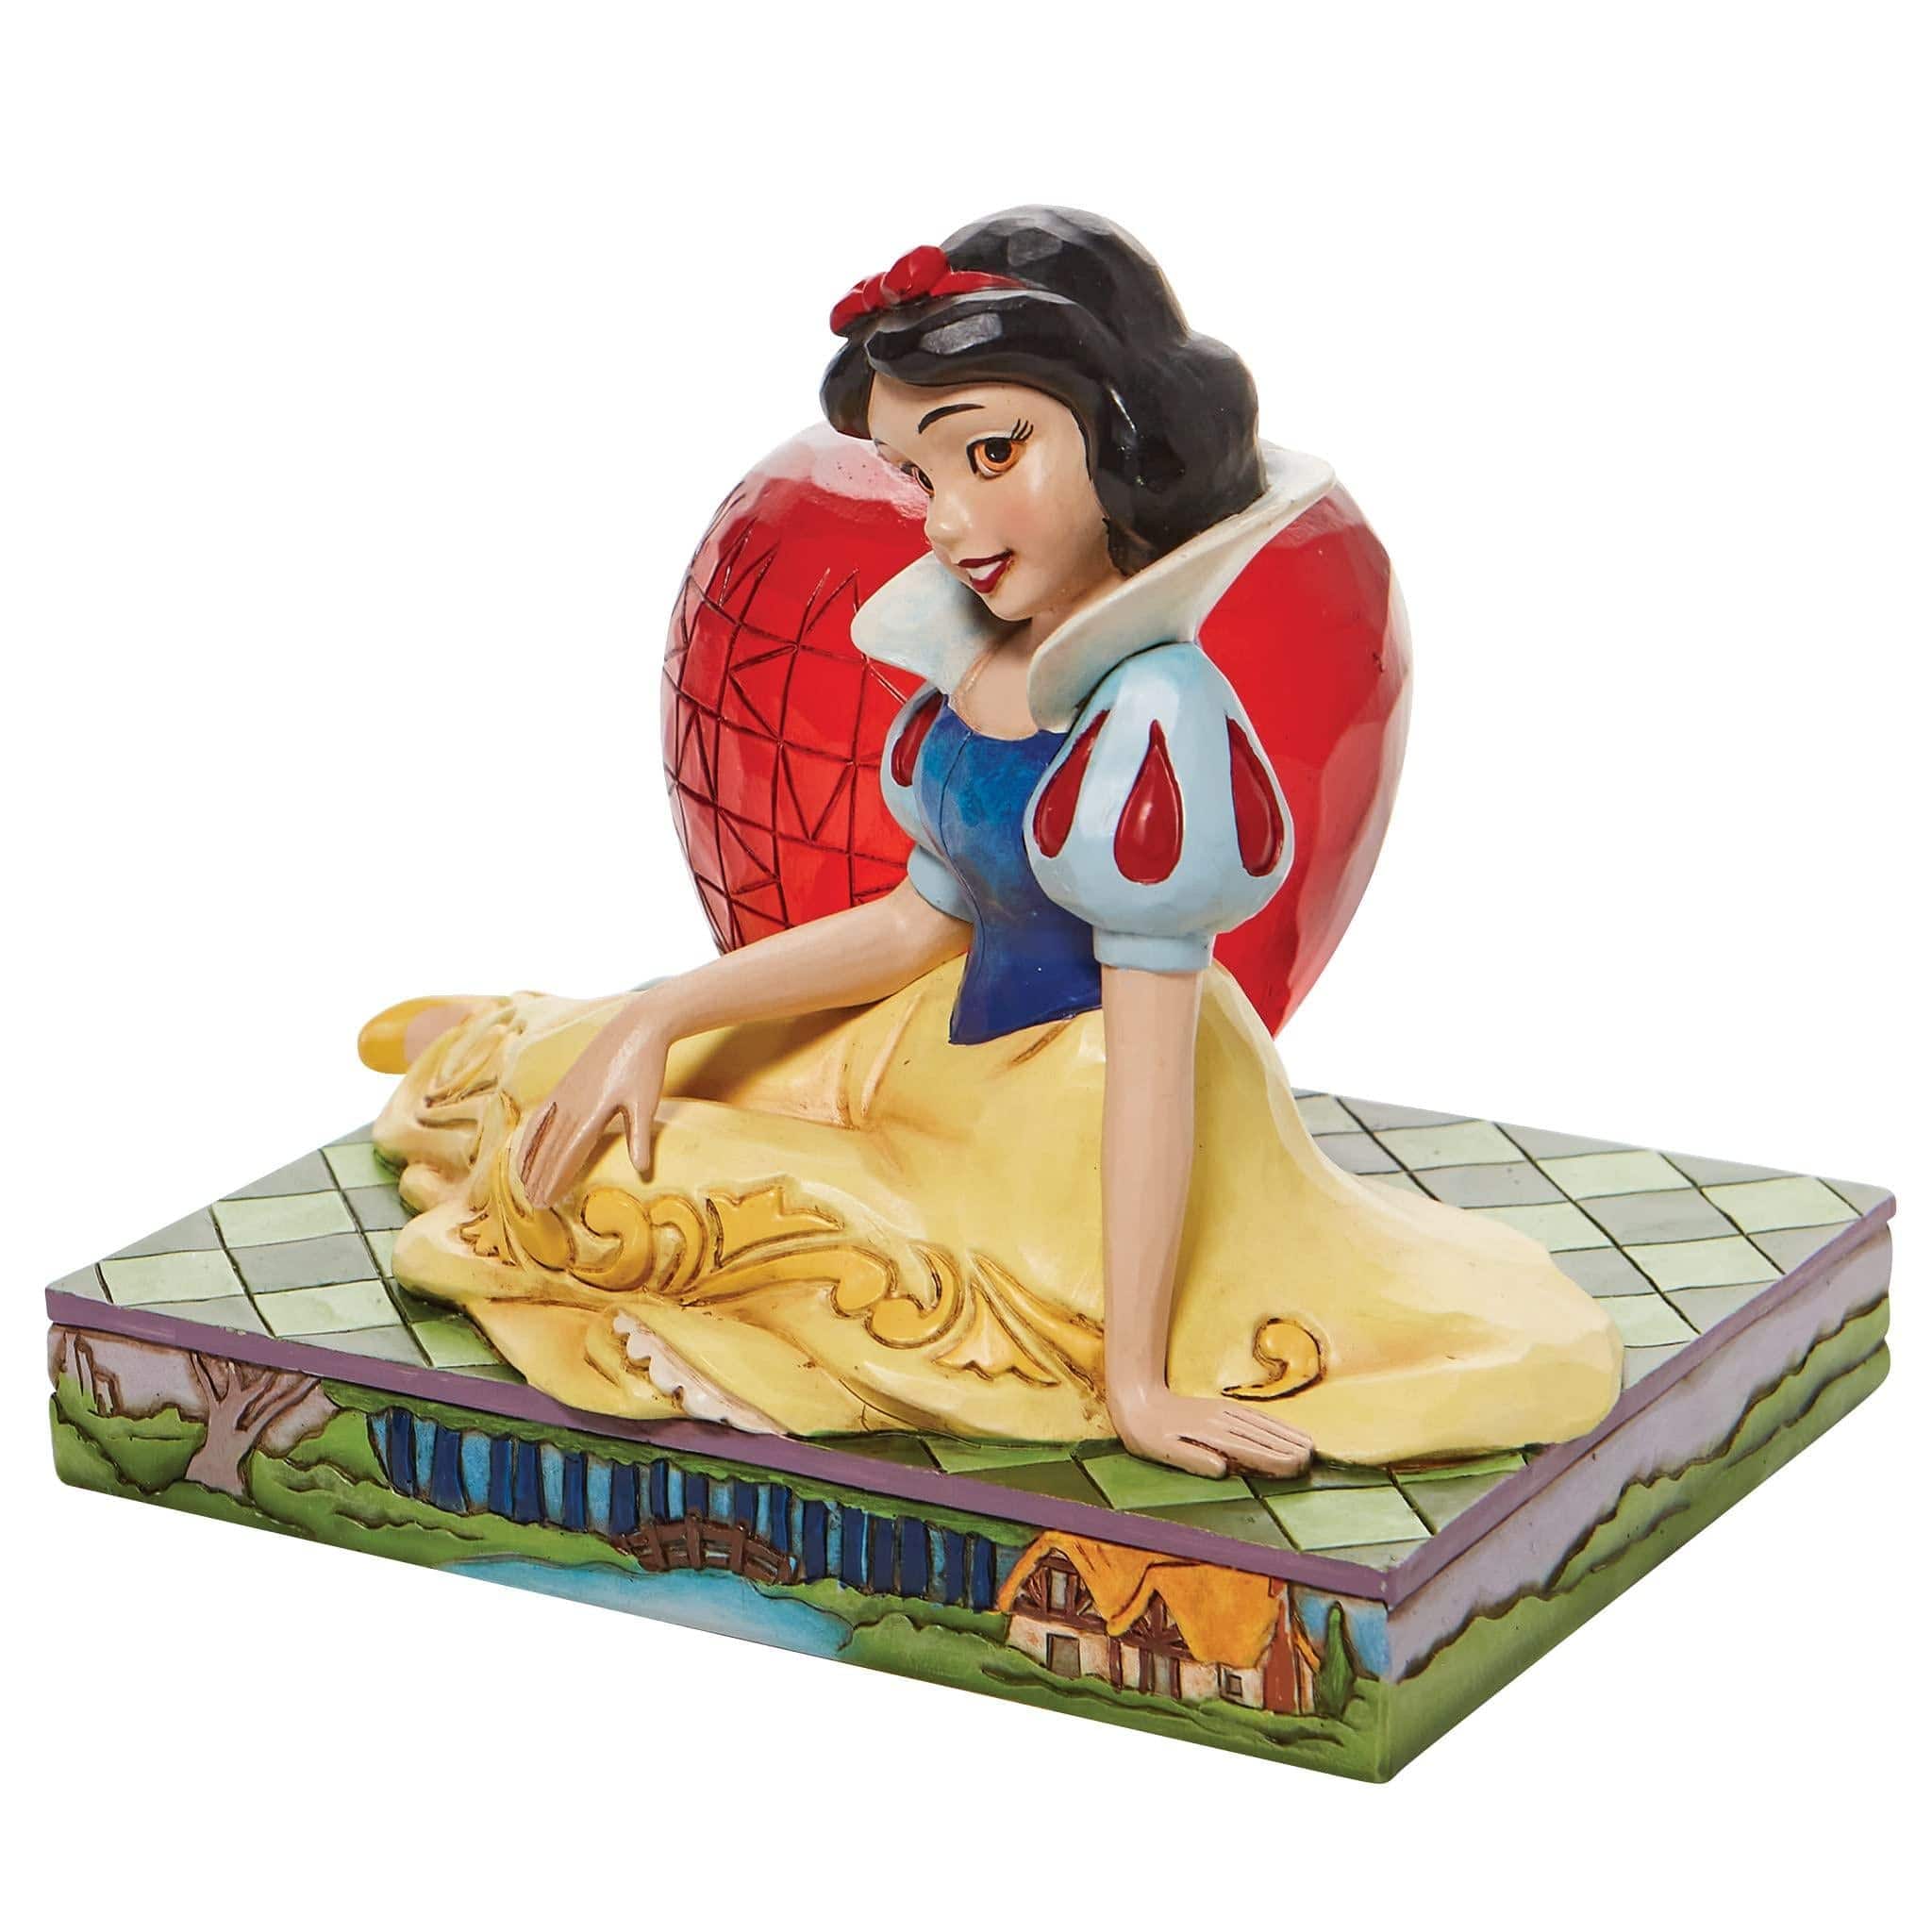 Enesco Disney Ornament Disney Traditions Figurine - A Tempting Offer - Snow White with Apple Figurine